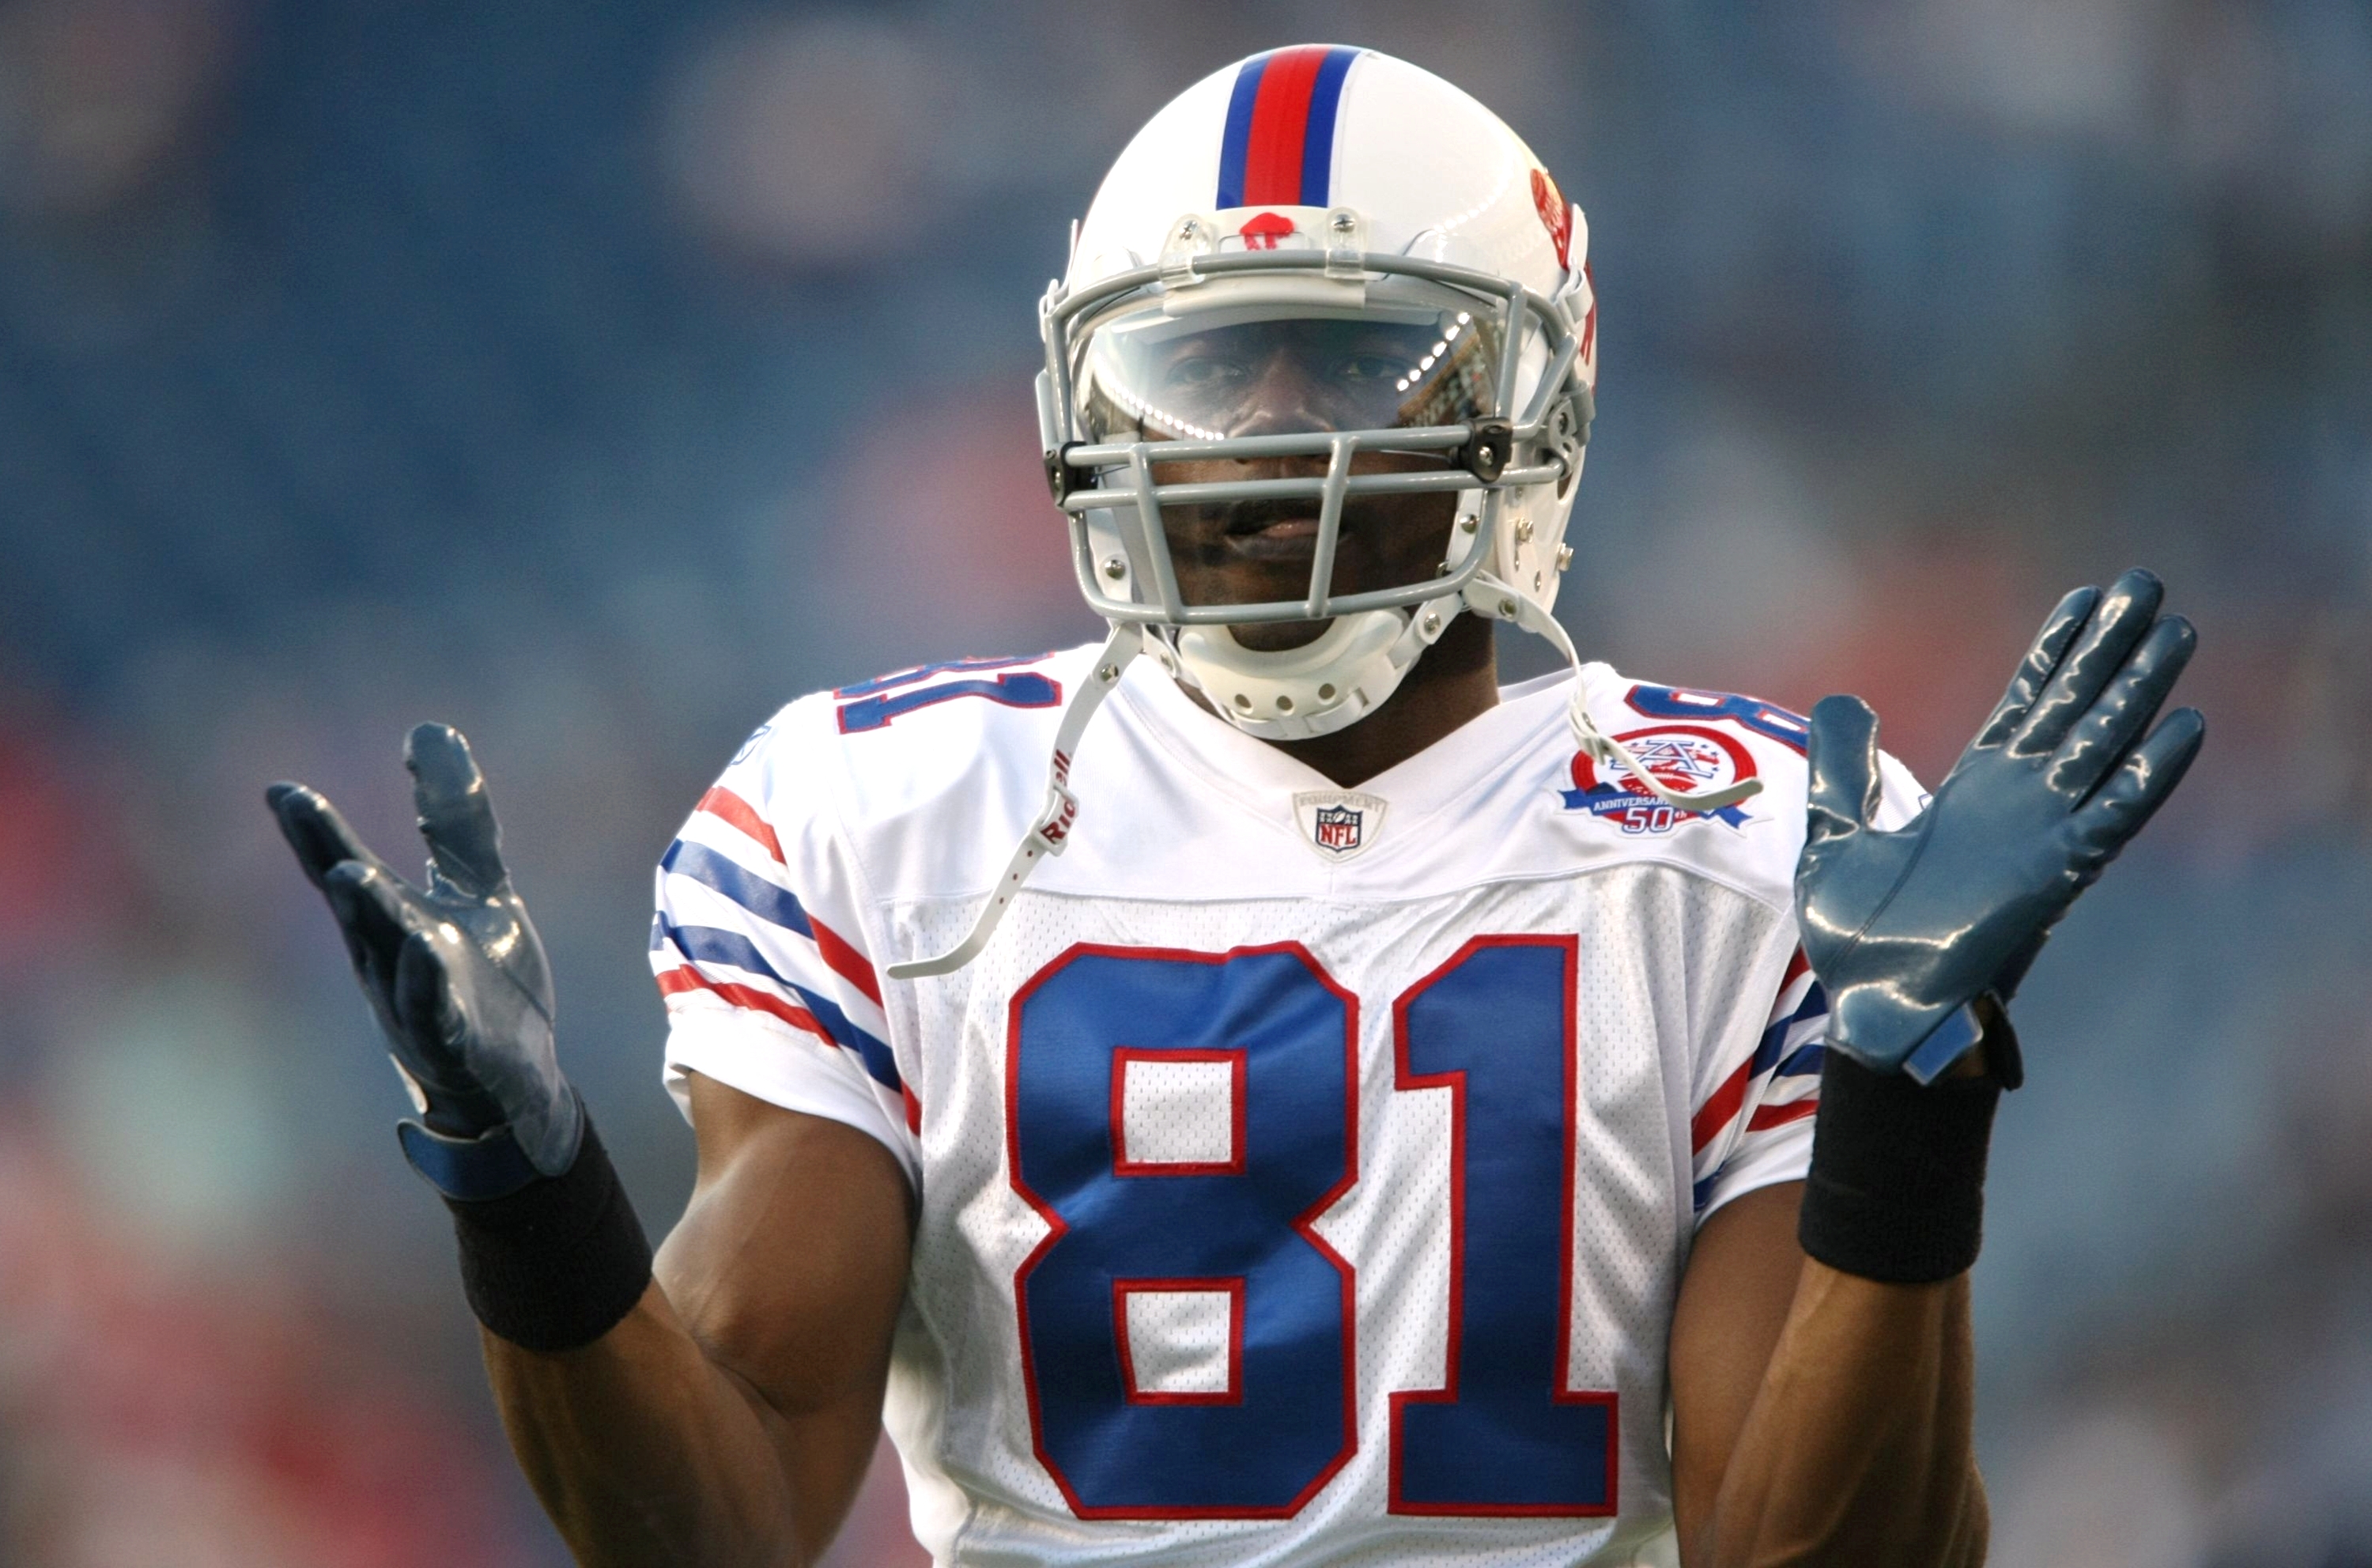 FOXBORO, MA - SEPTEMBER 14:  Terrell Owens #81 of the Buffalo Bills warms up before the game against the New England Patriots on September 14, 2009 at Gillette Stadium in Foxboro, Massachusetts. (Photo by Elsa/Getty Images)